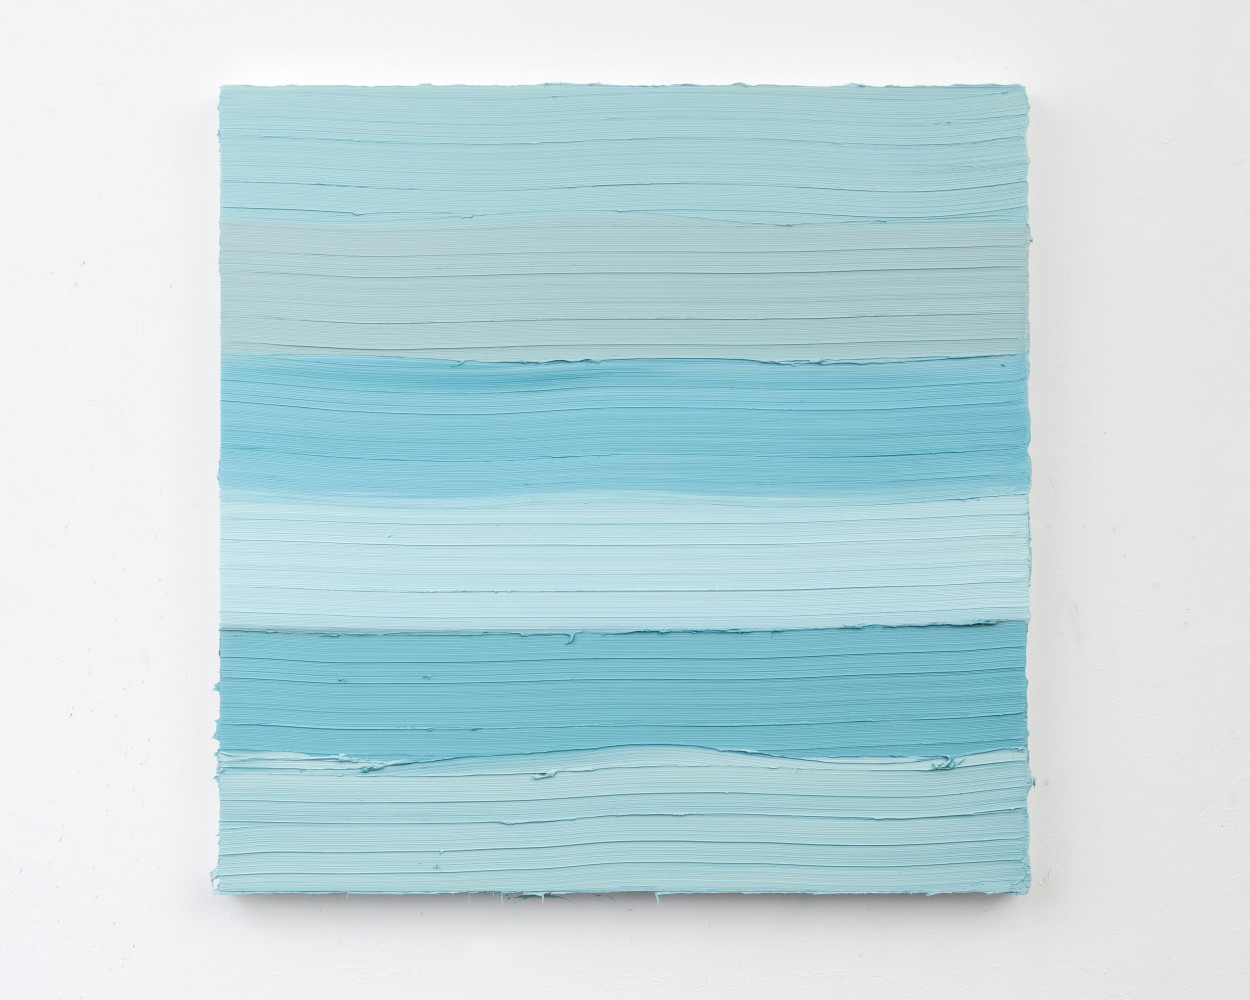 A light blue painting by Jason Martin, almost monochromatic